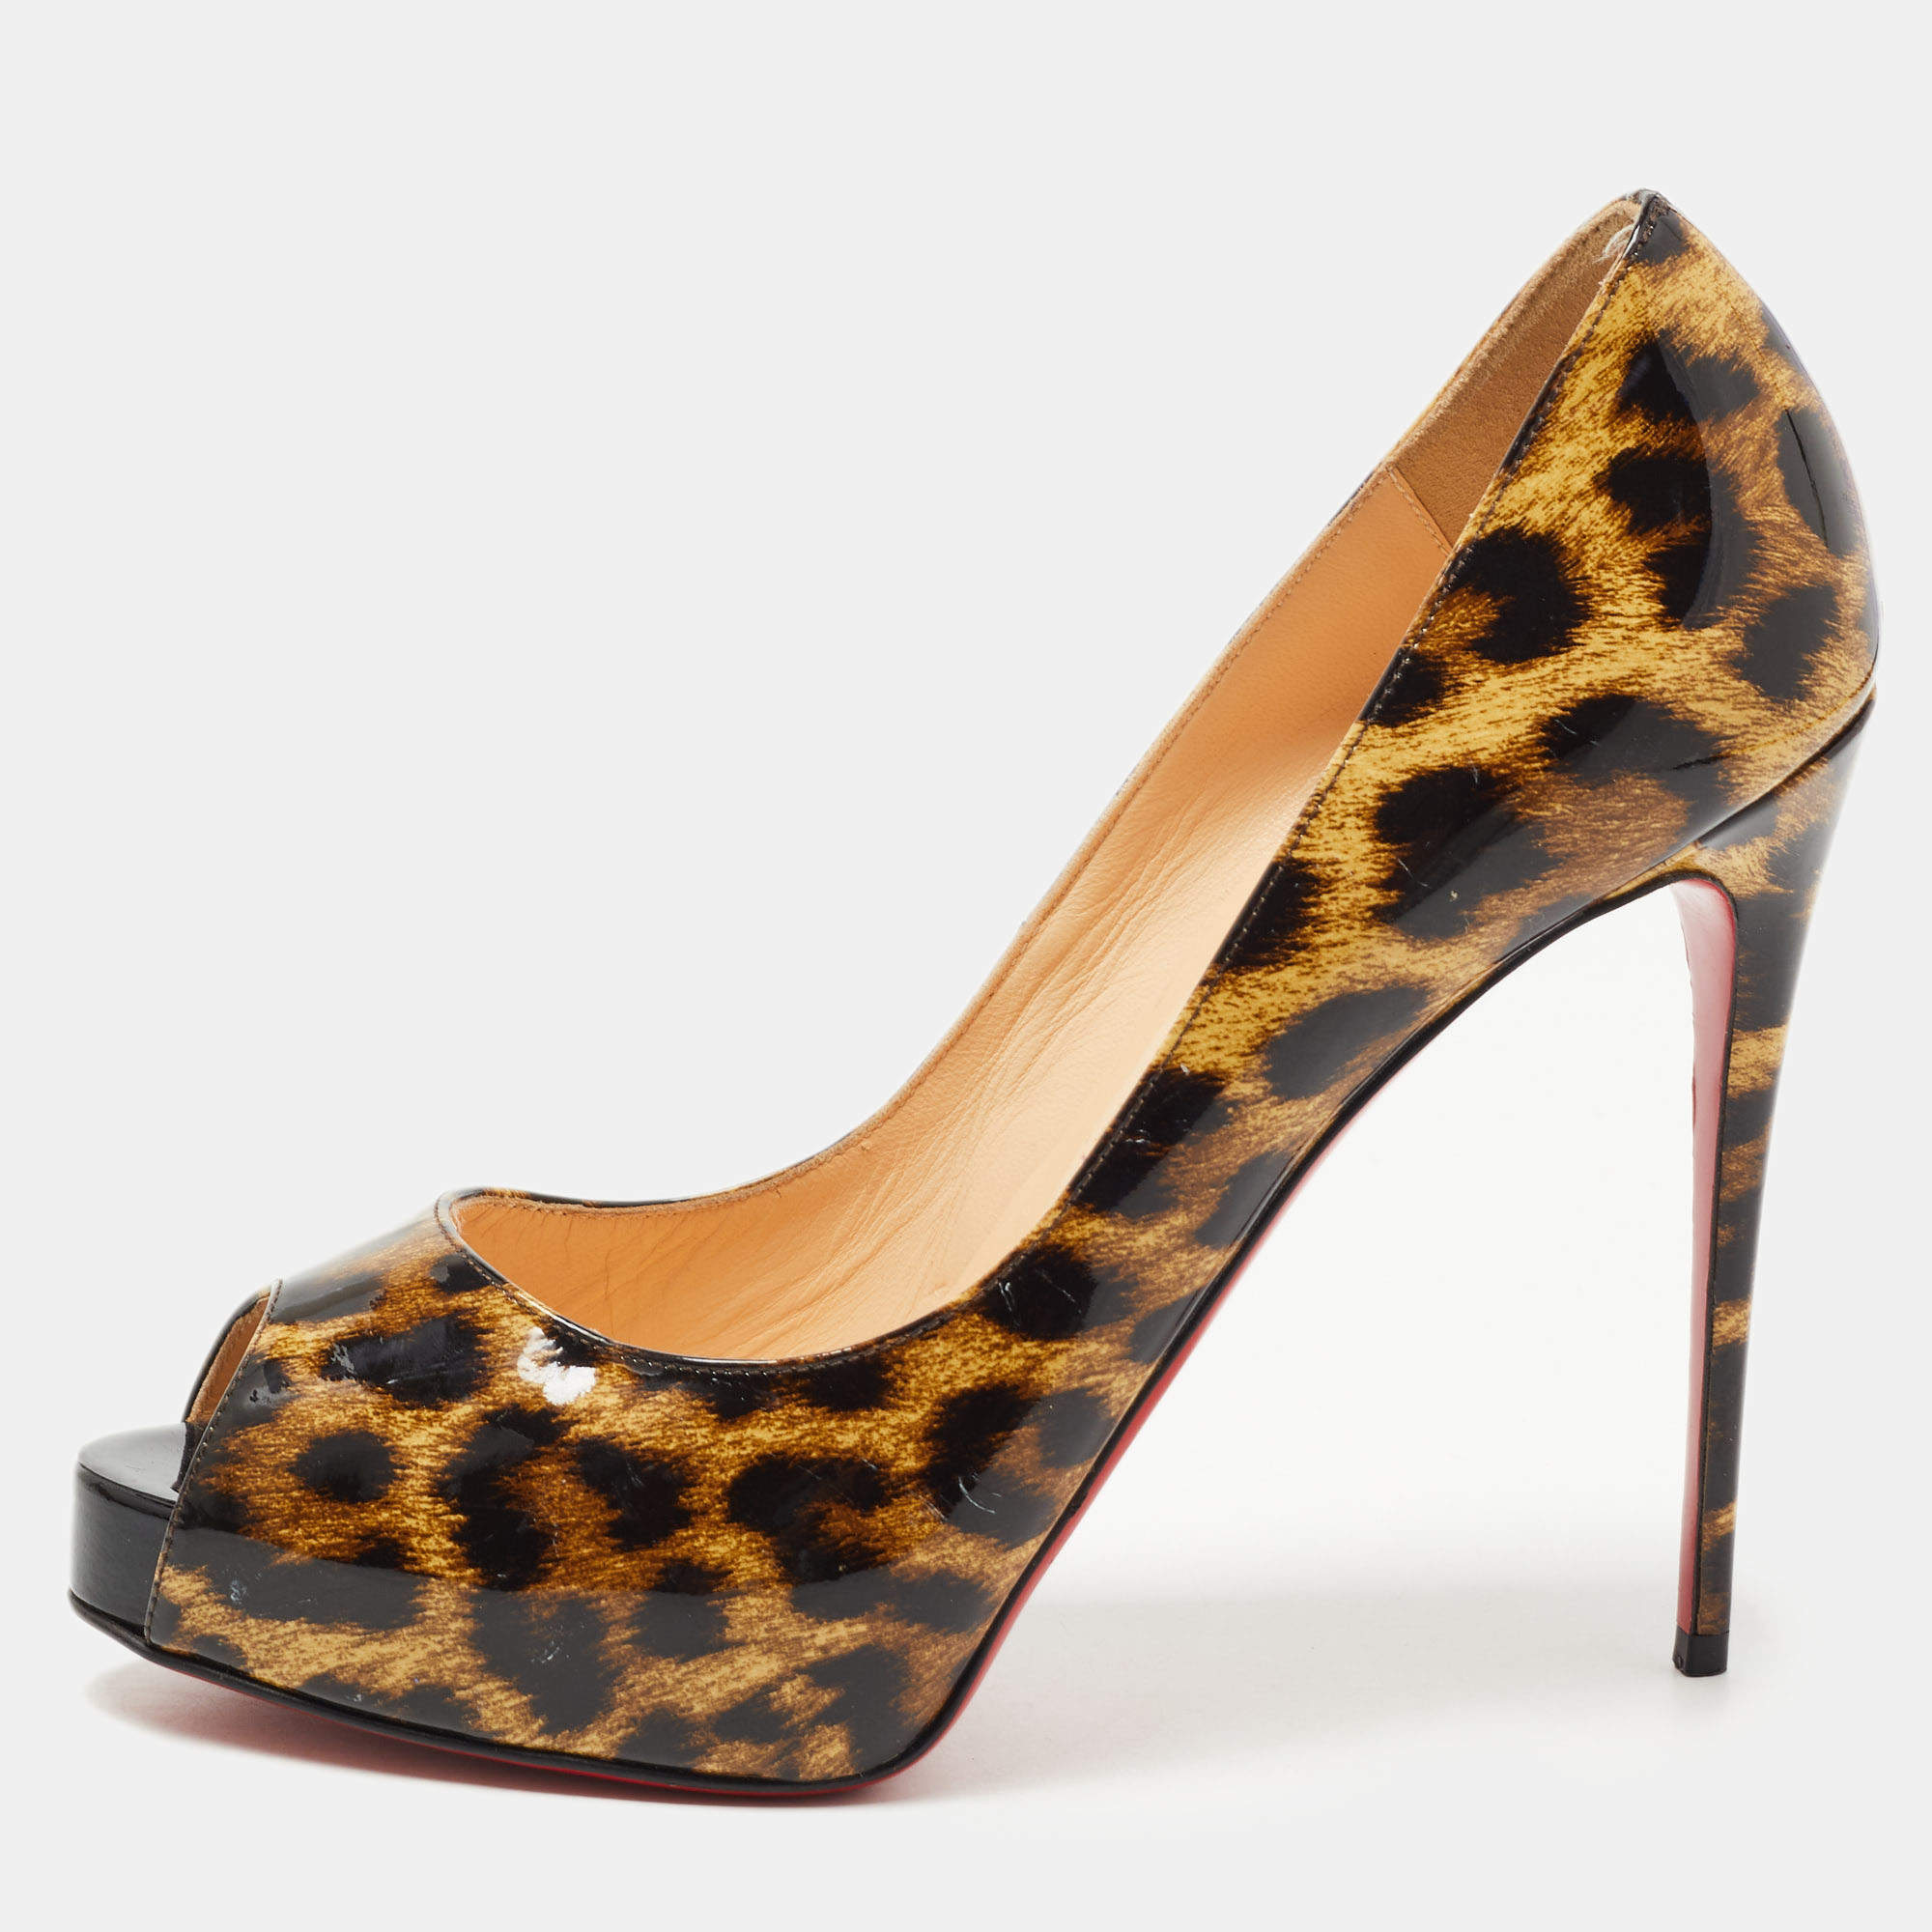 Christian Louboutin Leopard Patent Leather New Very Prive Pumps 38.5 Christian Louboutin | TLC